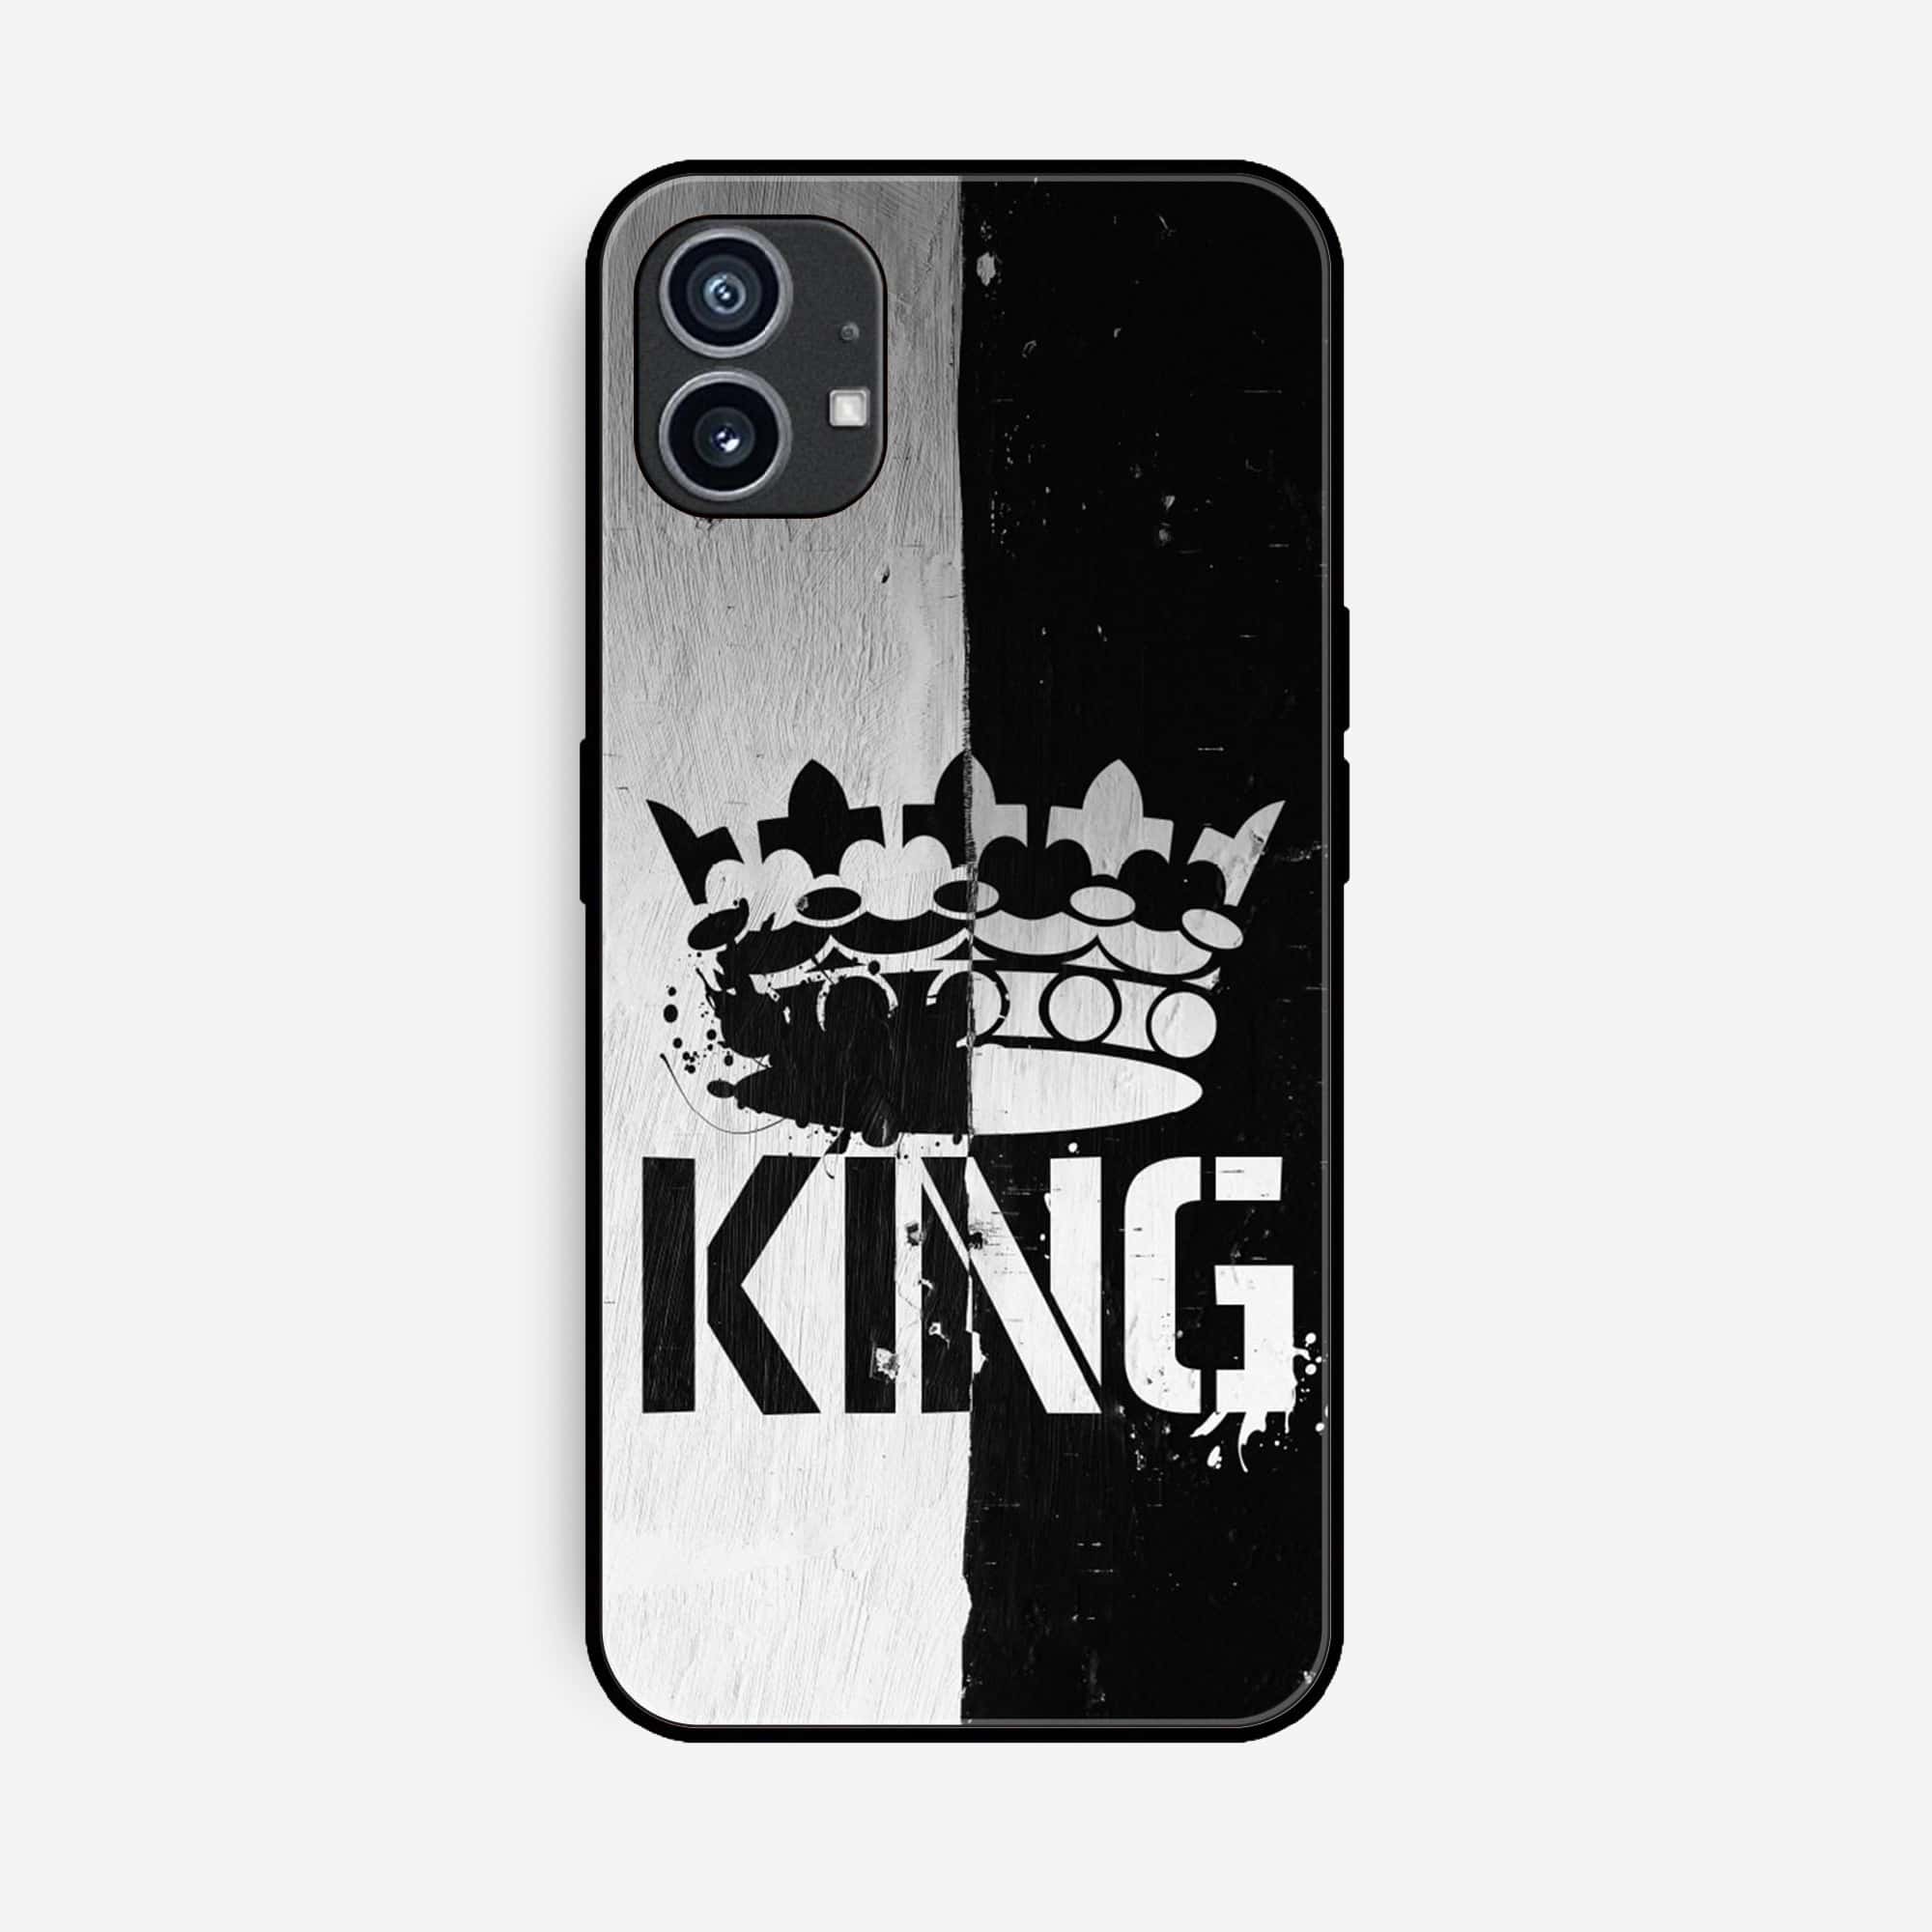 Nothing Phone 1  King Series V2.0 Series Premium Printed Glass soft Bumper shock Proof Case